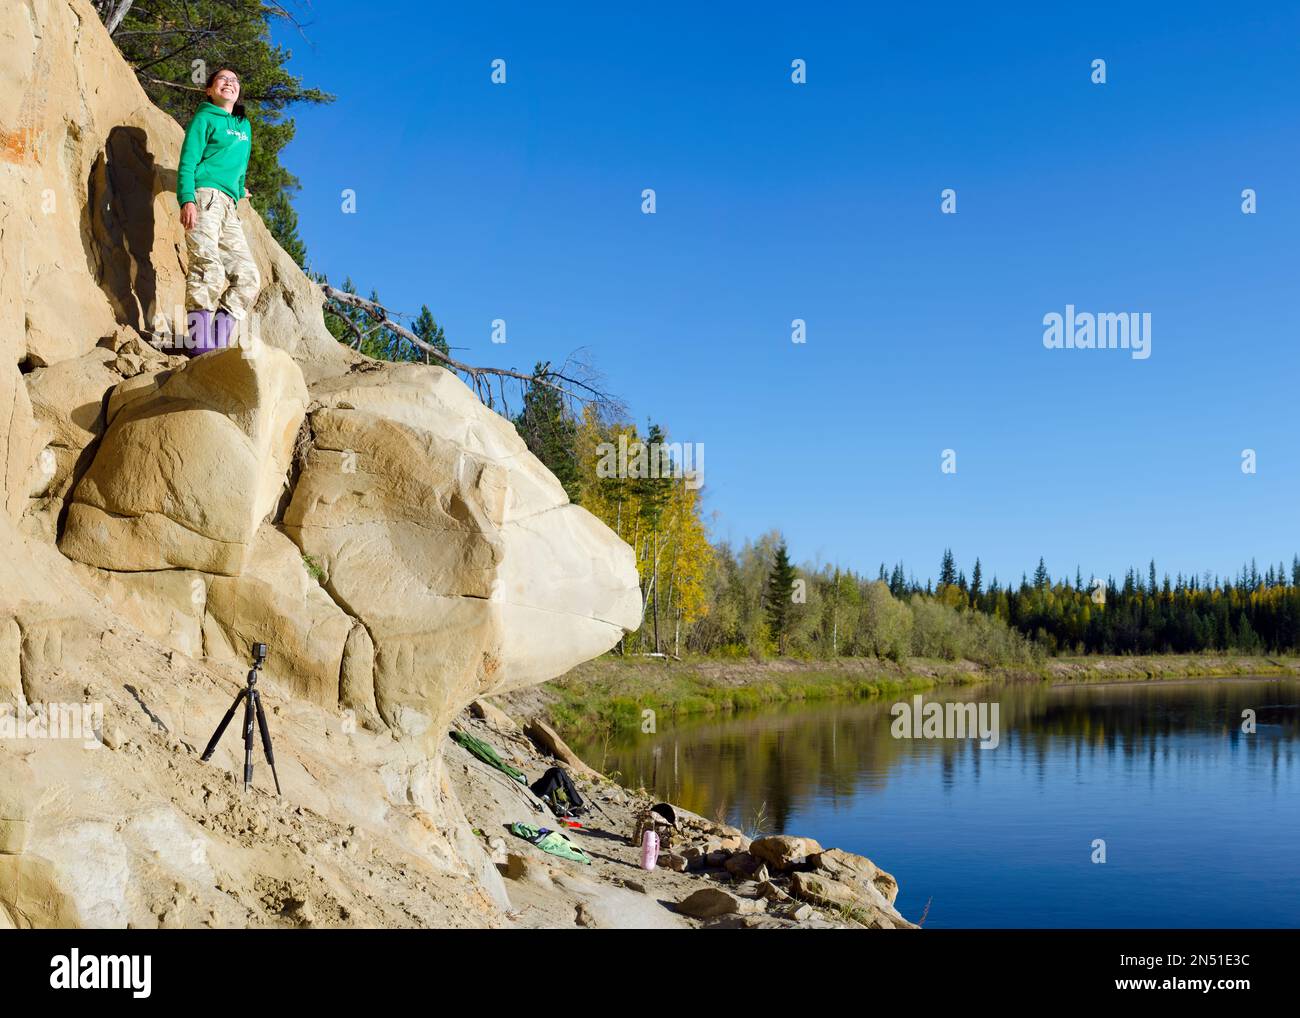 Yakut smiling girl model tourist stands on a clay ledge in the taiga of Northern Yakutia under the trees by the river next to the action camera Stock Photo